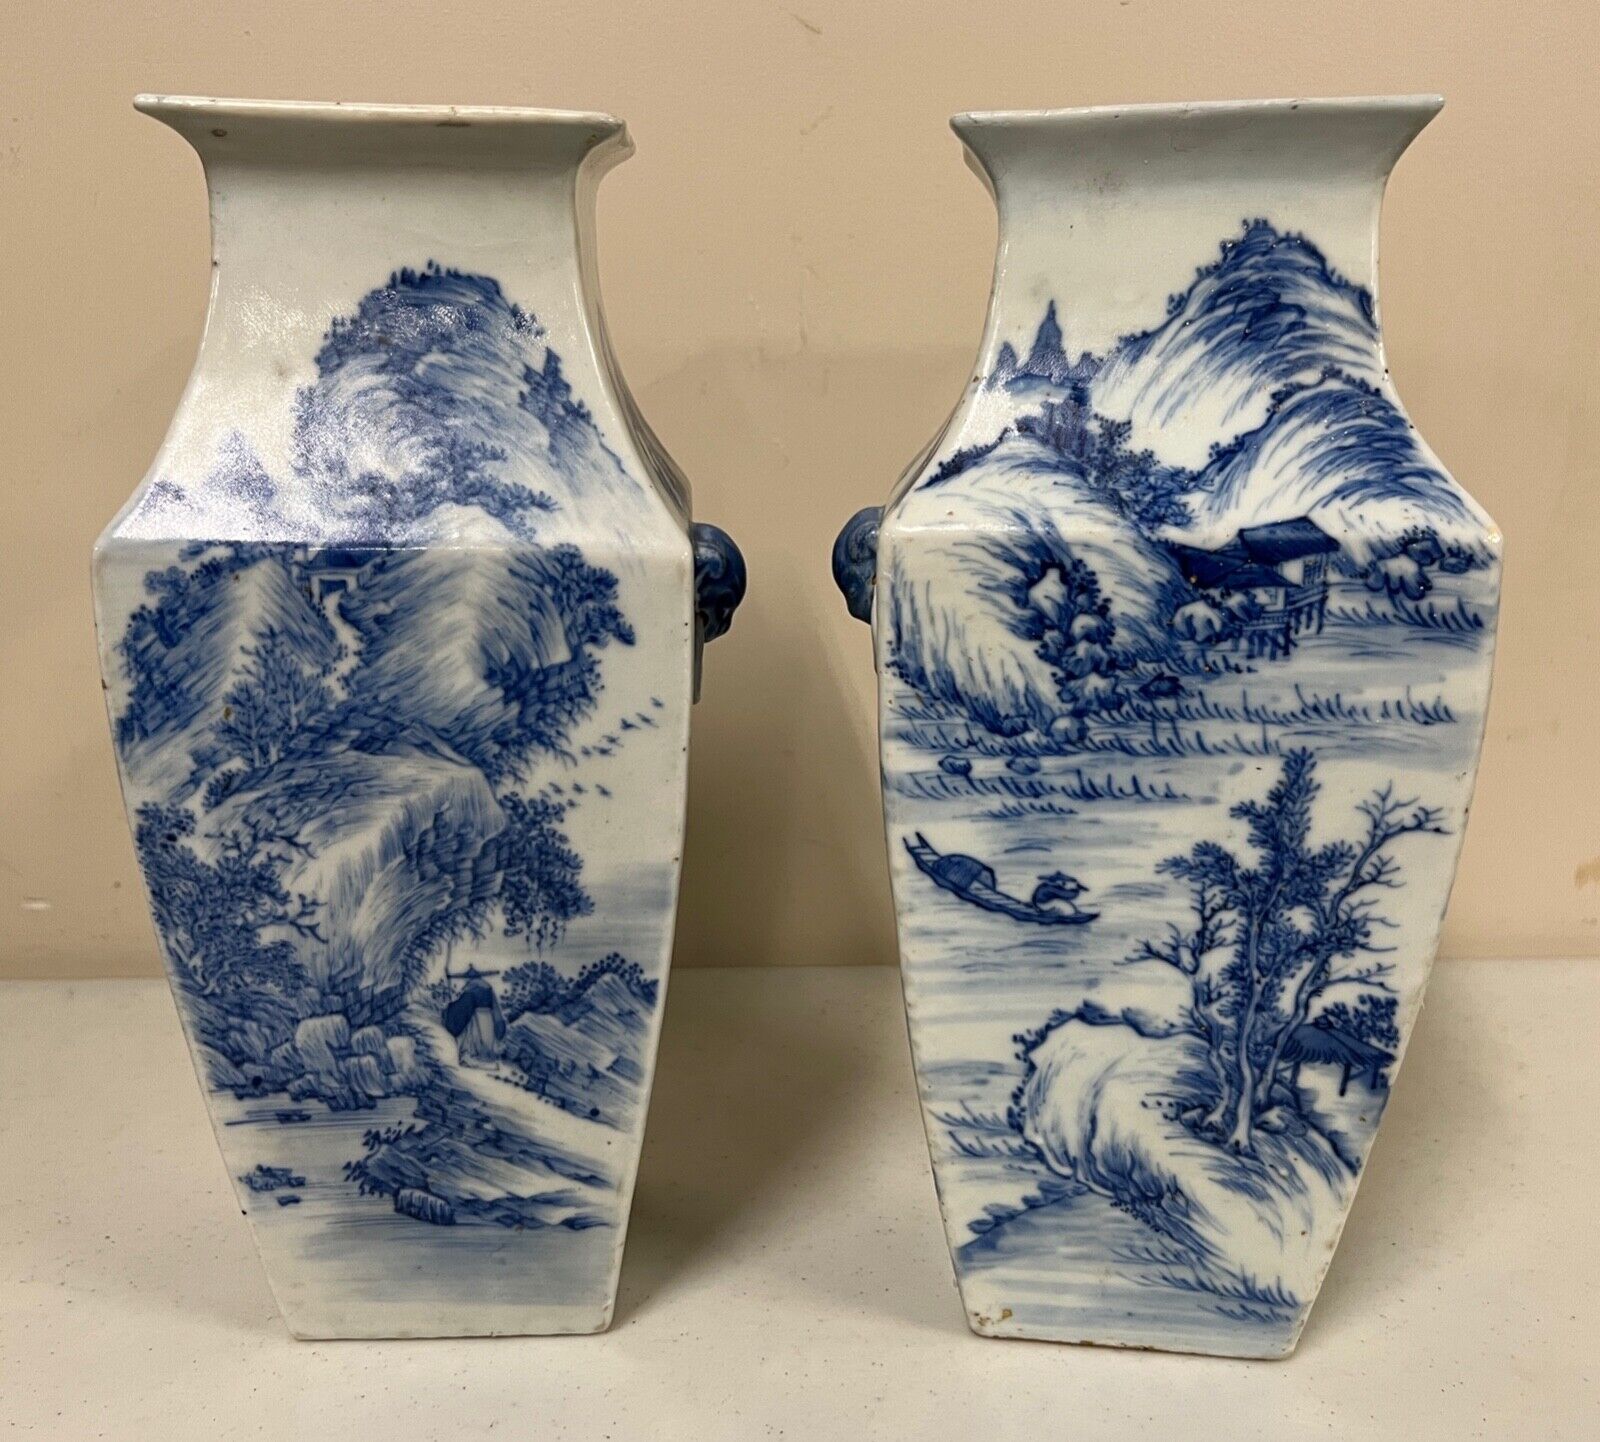 A Pair of Chinese Porcelain Blue and White Landscape Vases